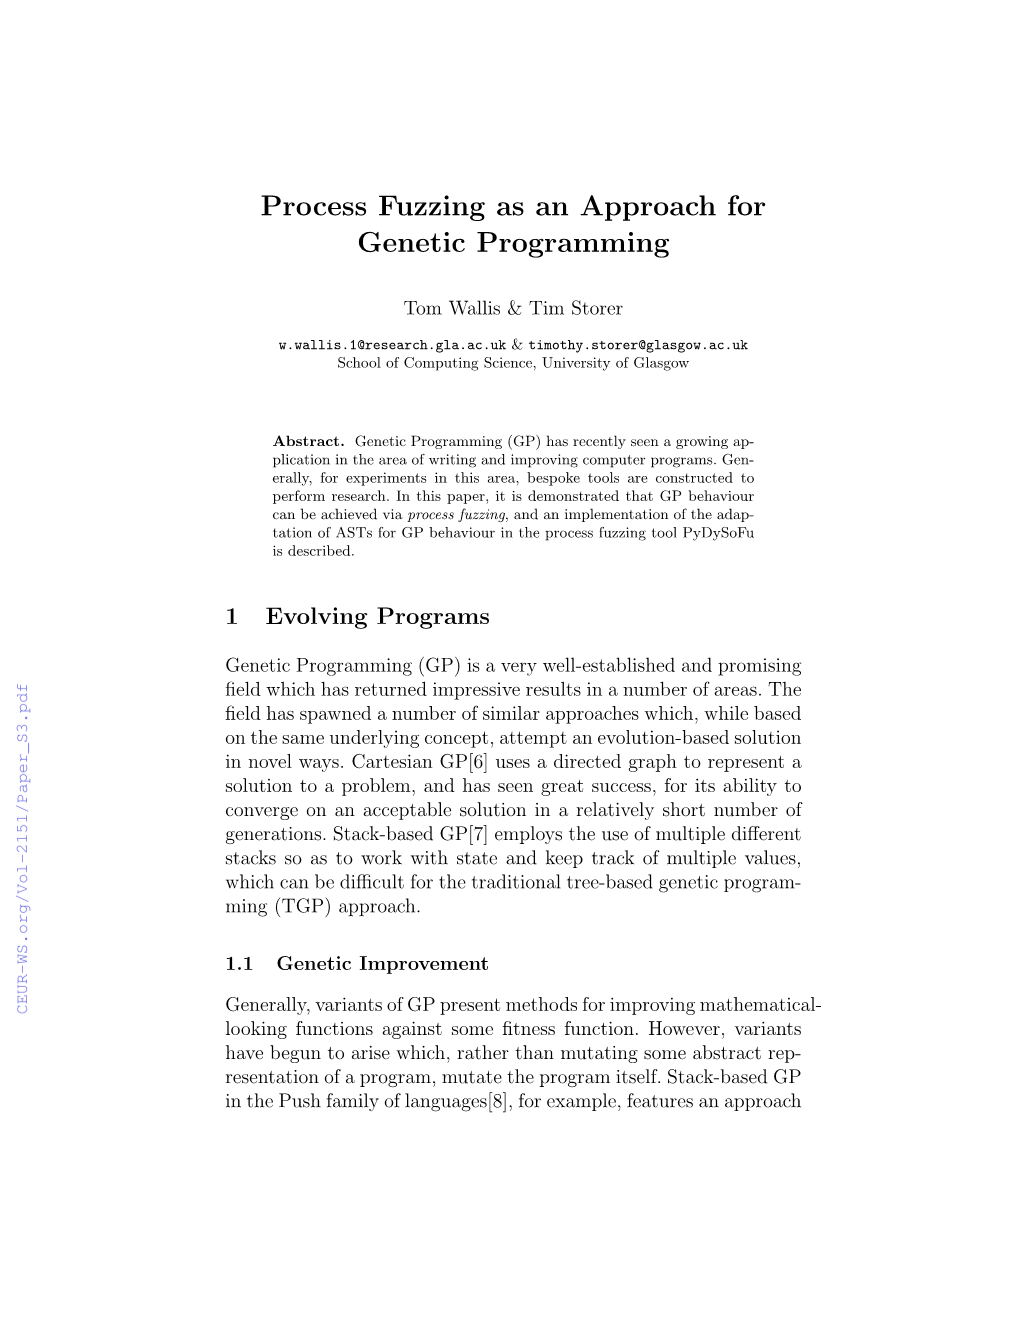 Process Fuzzing As an Approach for Genetic Programming